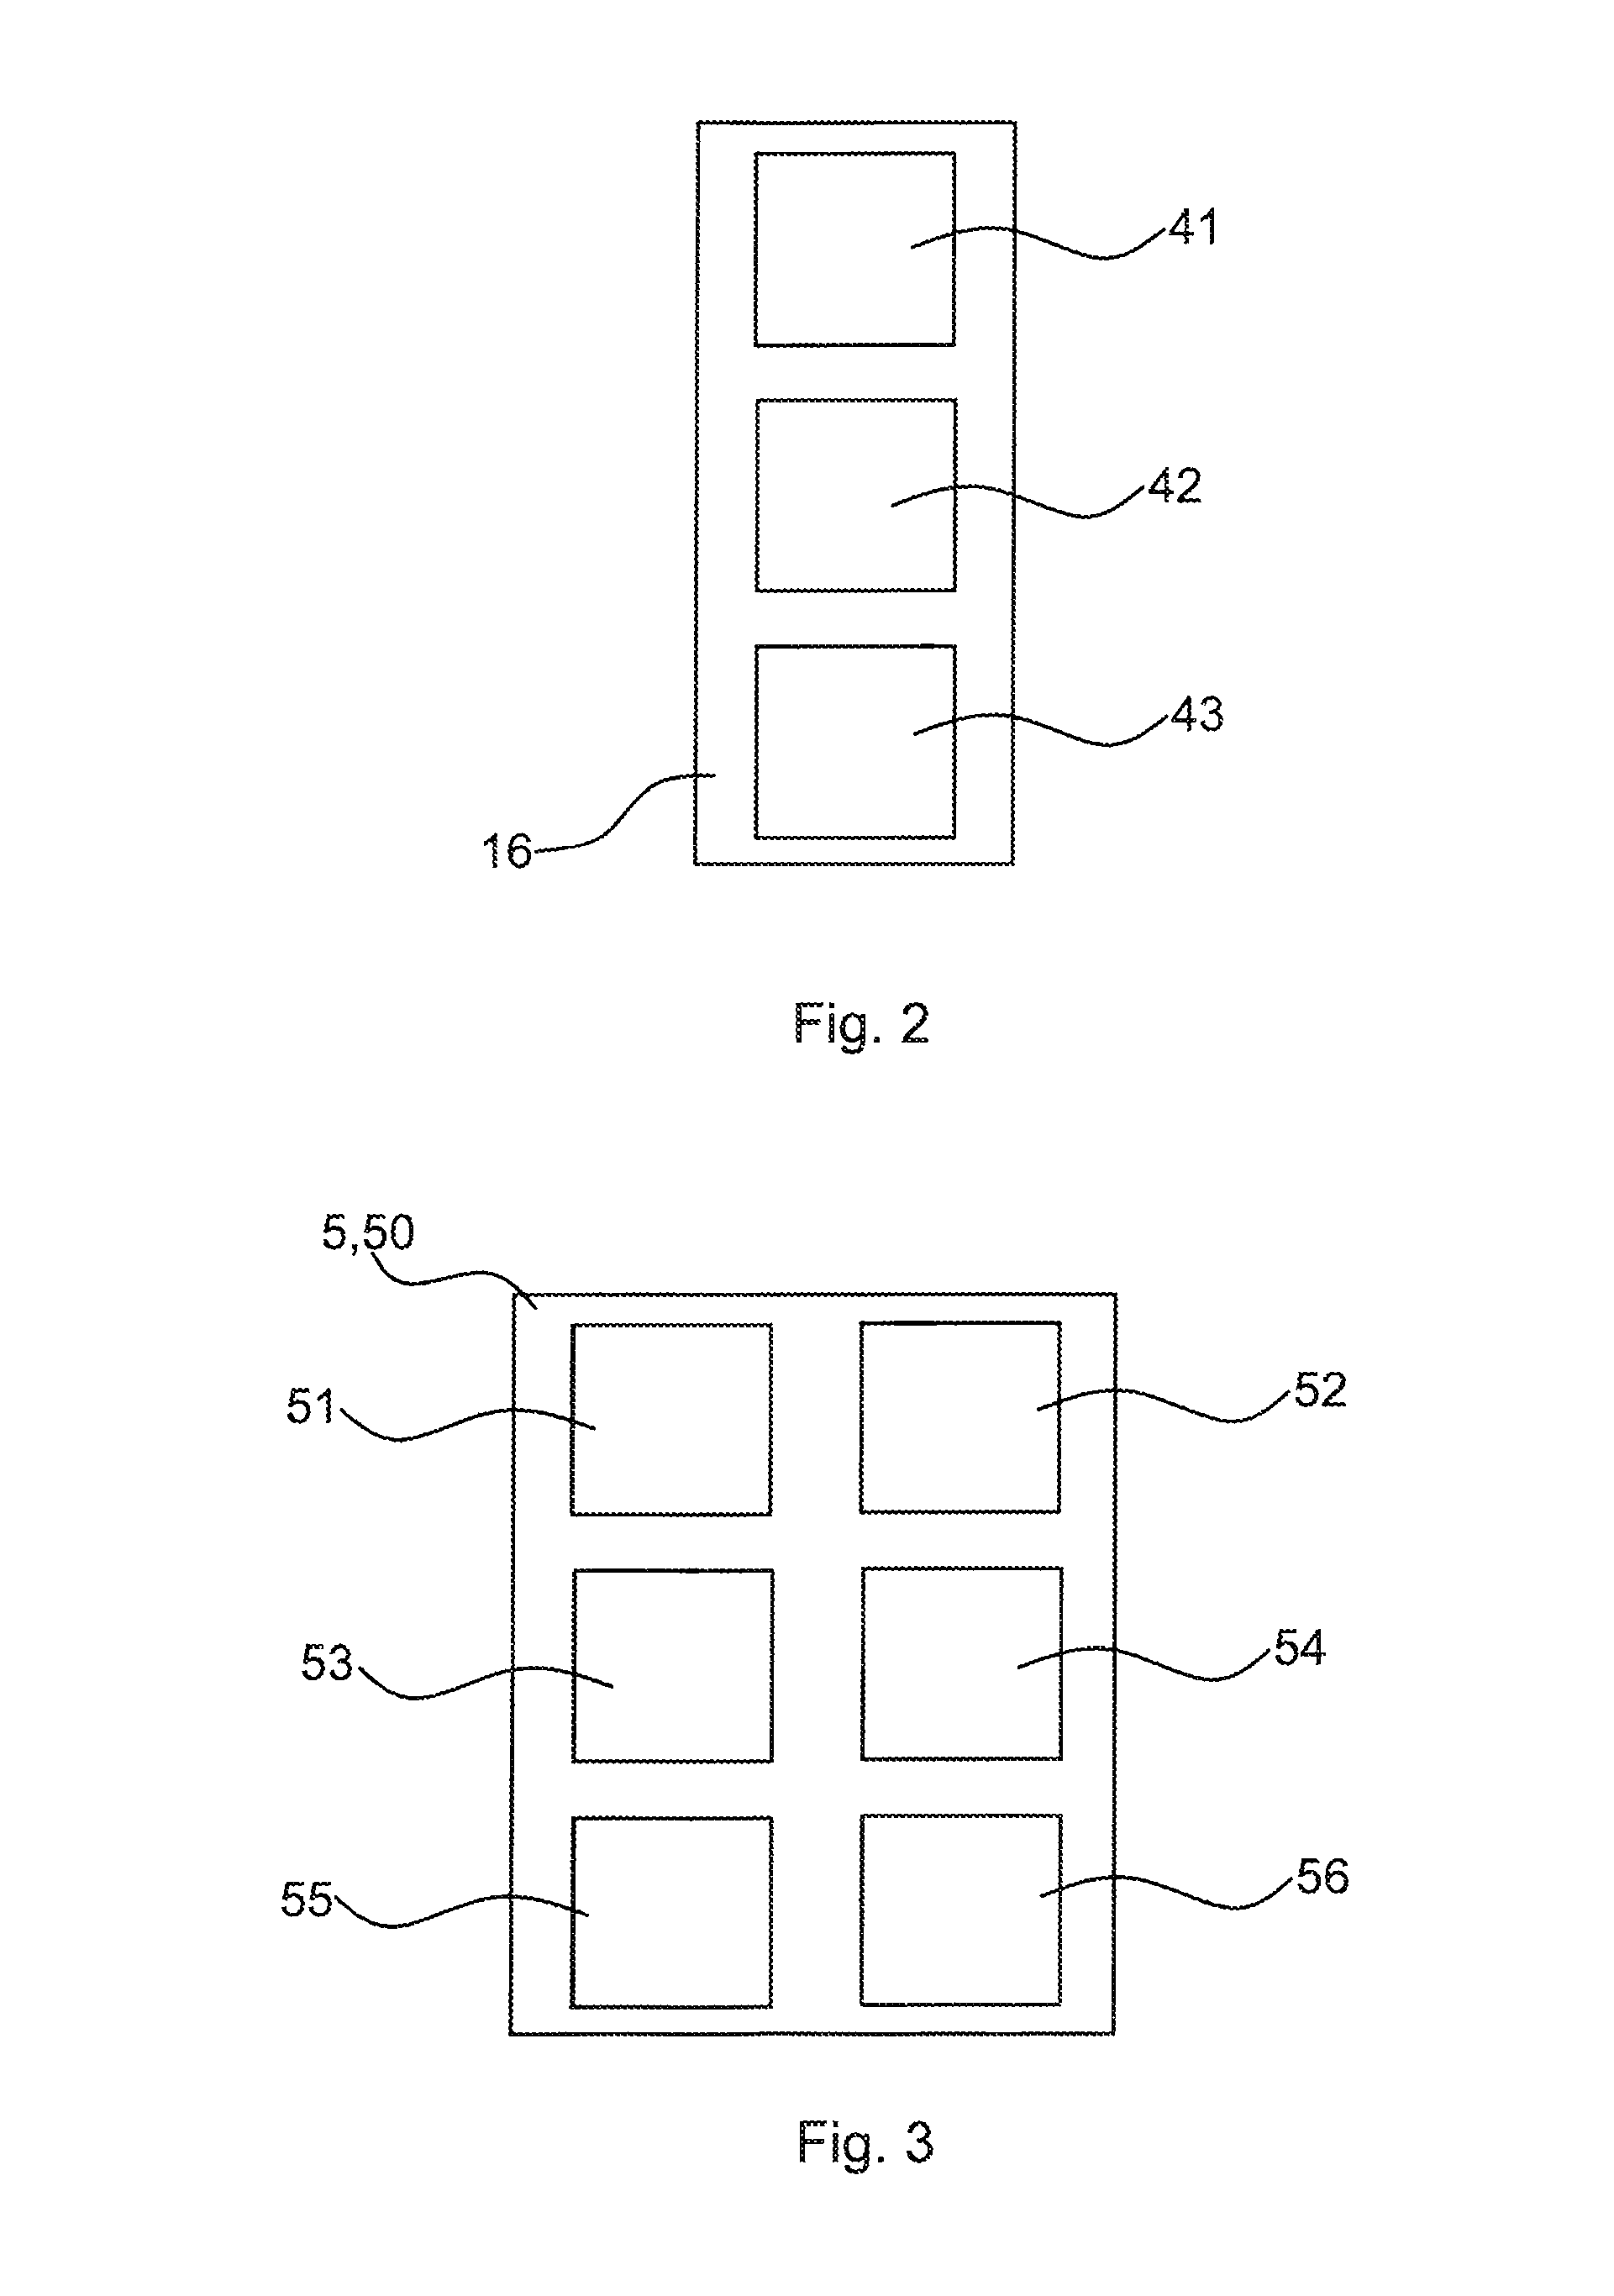 System and method for protecting an electrical power grid